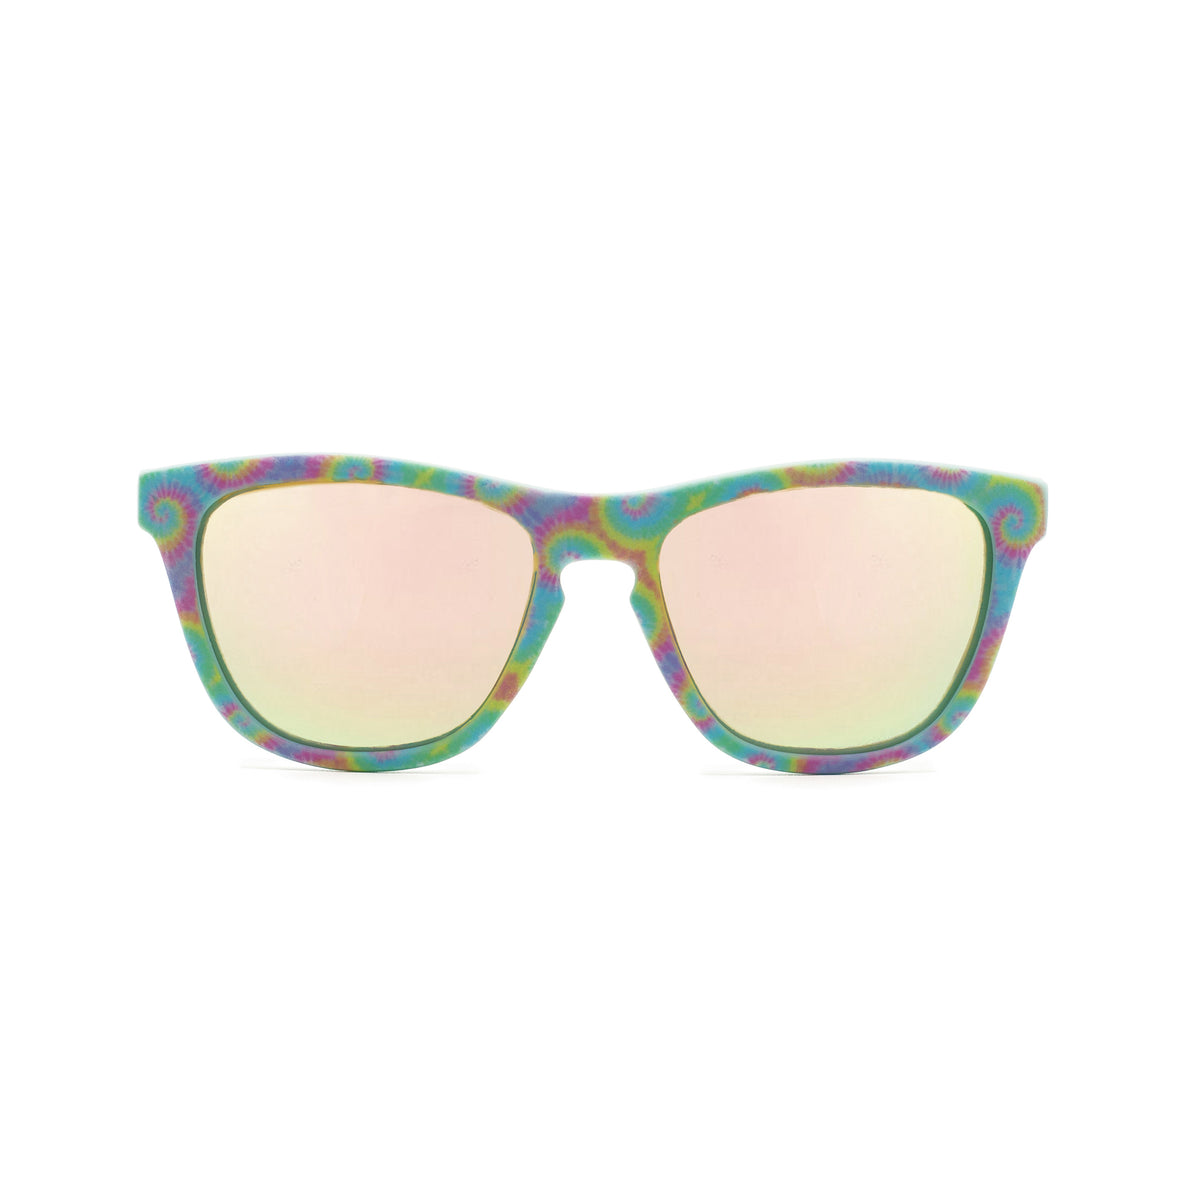 Front view of tie dye kids sunglasses with gold polarized lenses